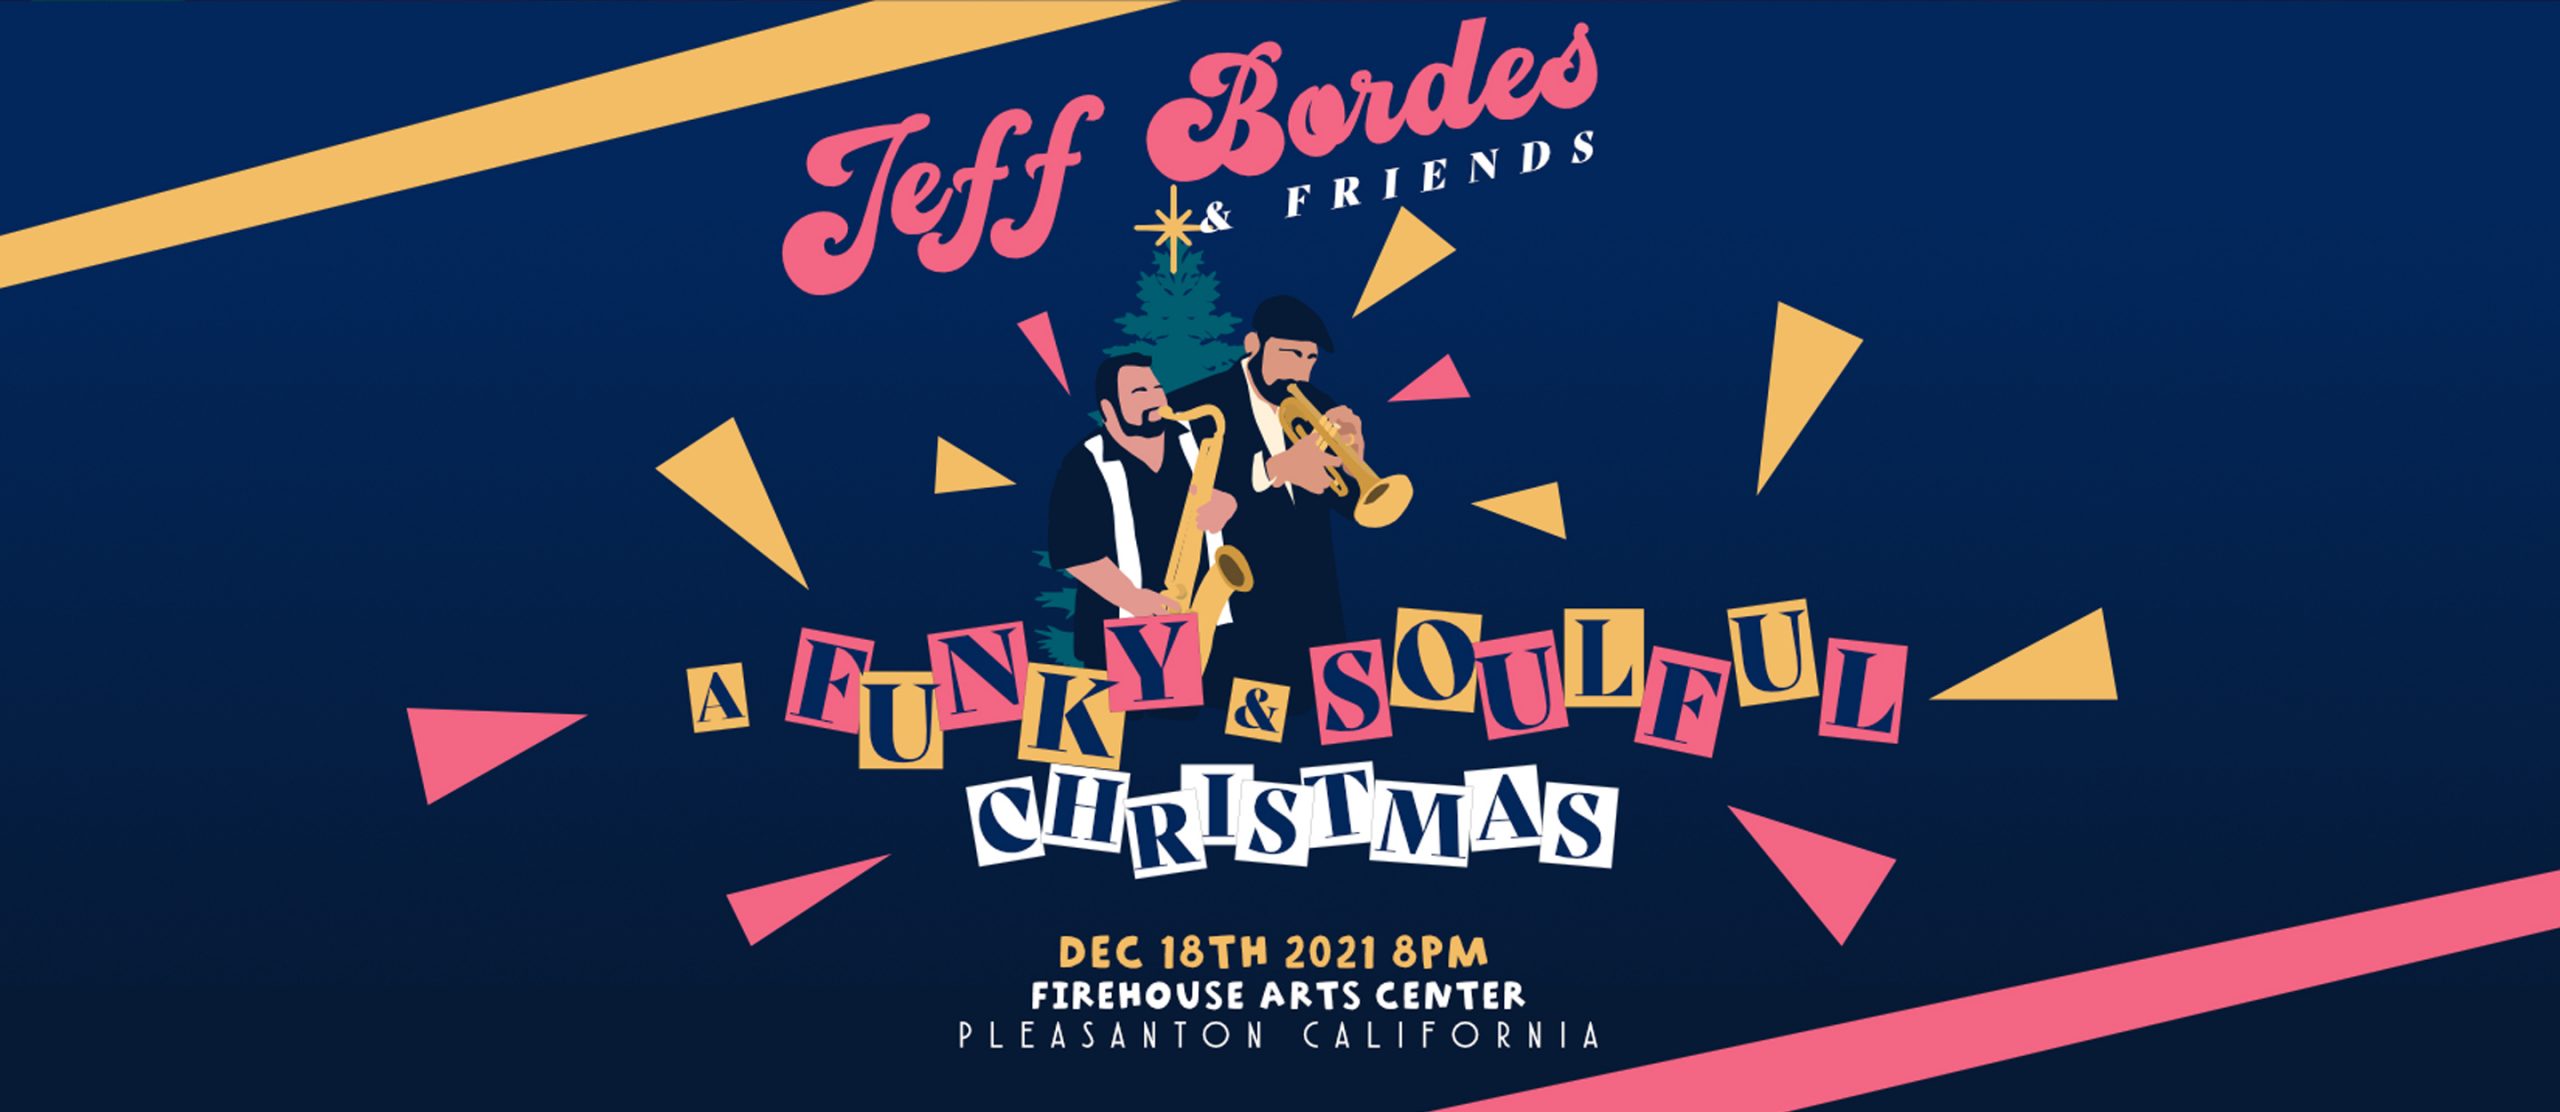 Jeff Bordes and Friends Present: A Funky & Soulful Christmas